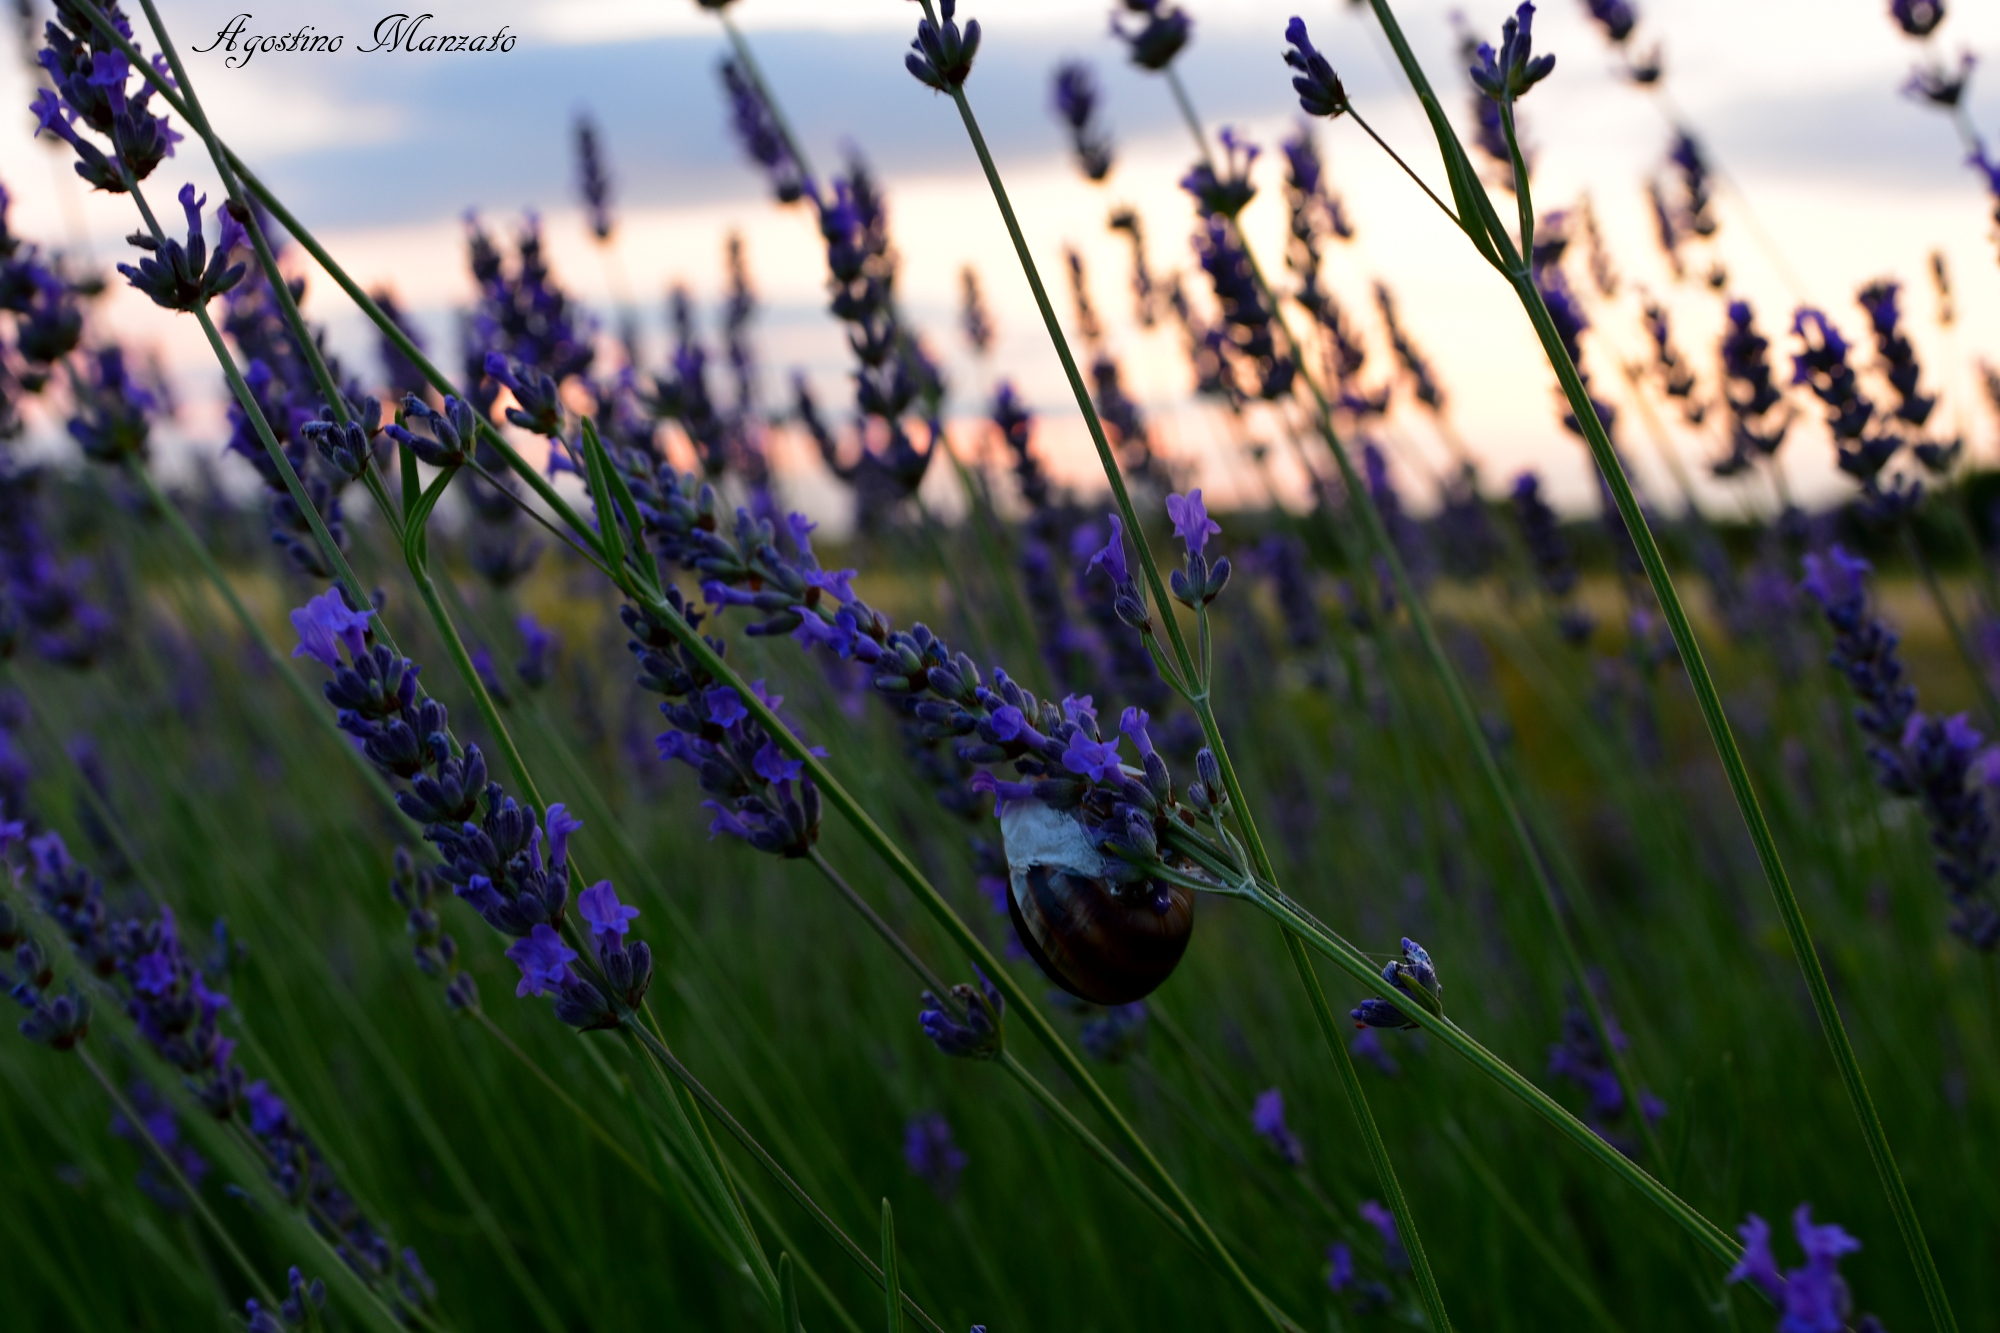 The Snail and the lavender...